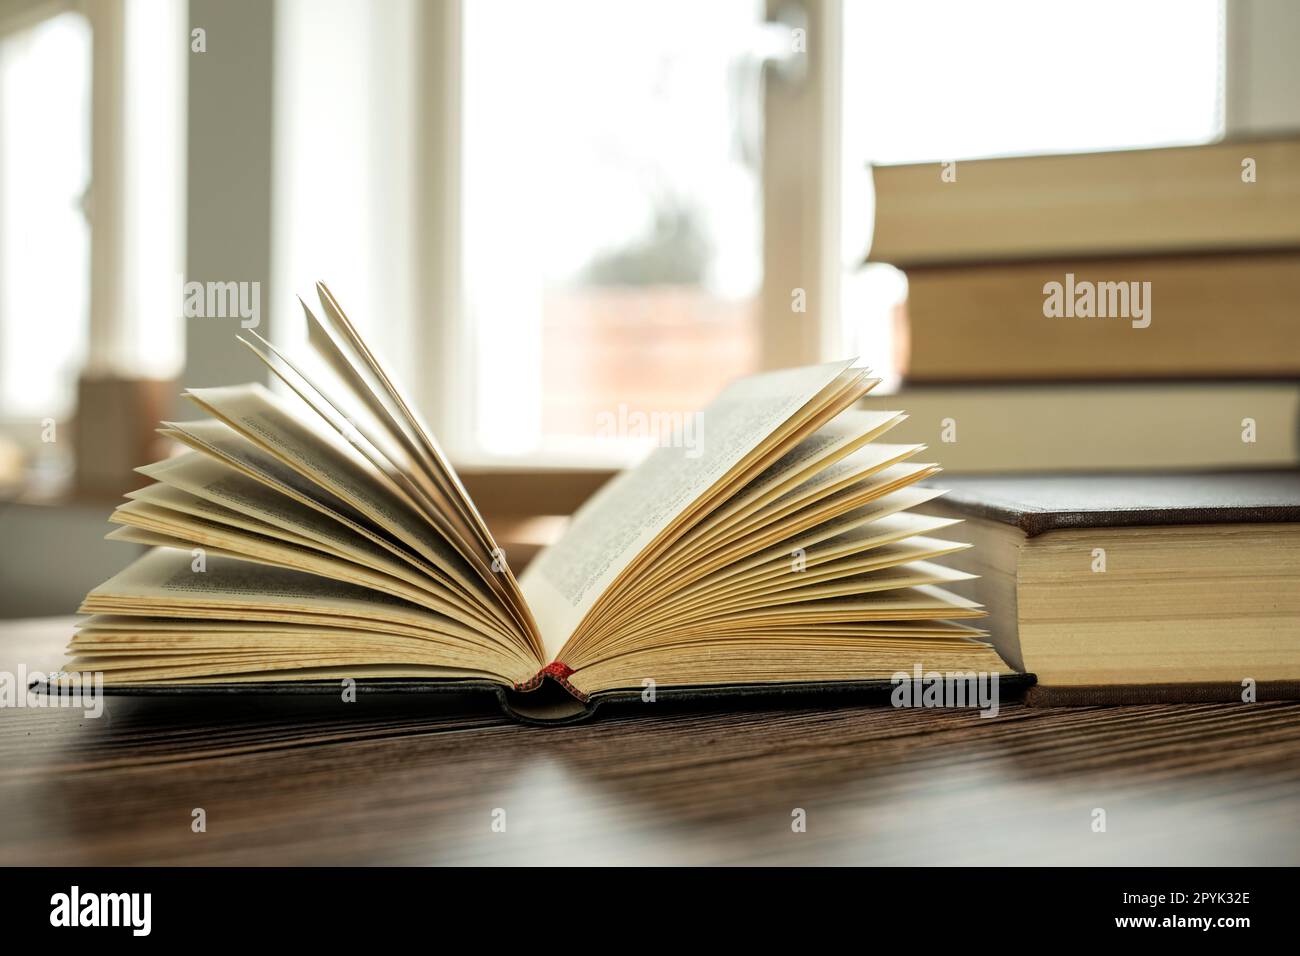 Education learning concept with opening book or textbook at home in office room, stack piles of literature text academic archive on reading desk and aisle of bookshelves in school study class room background interior Stock Photo